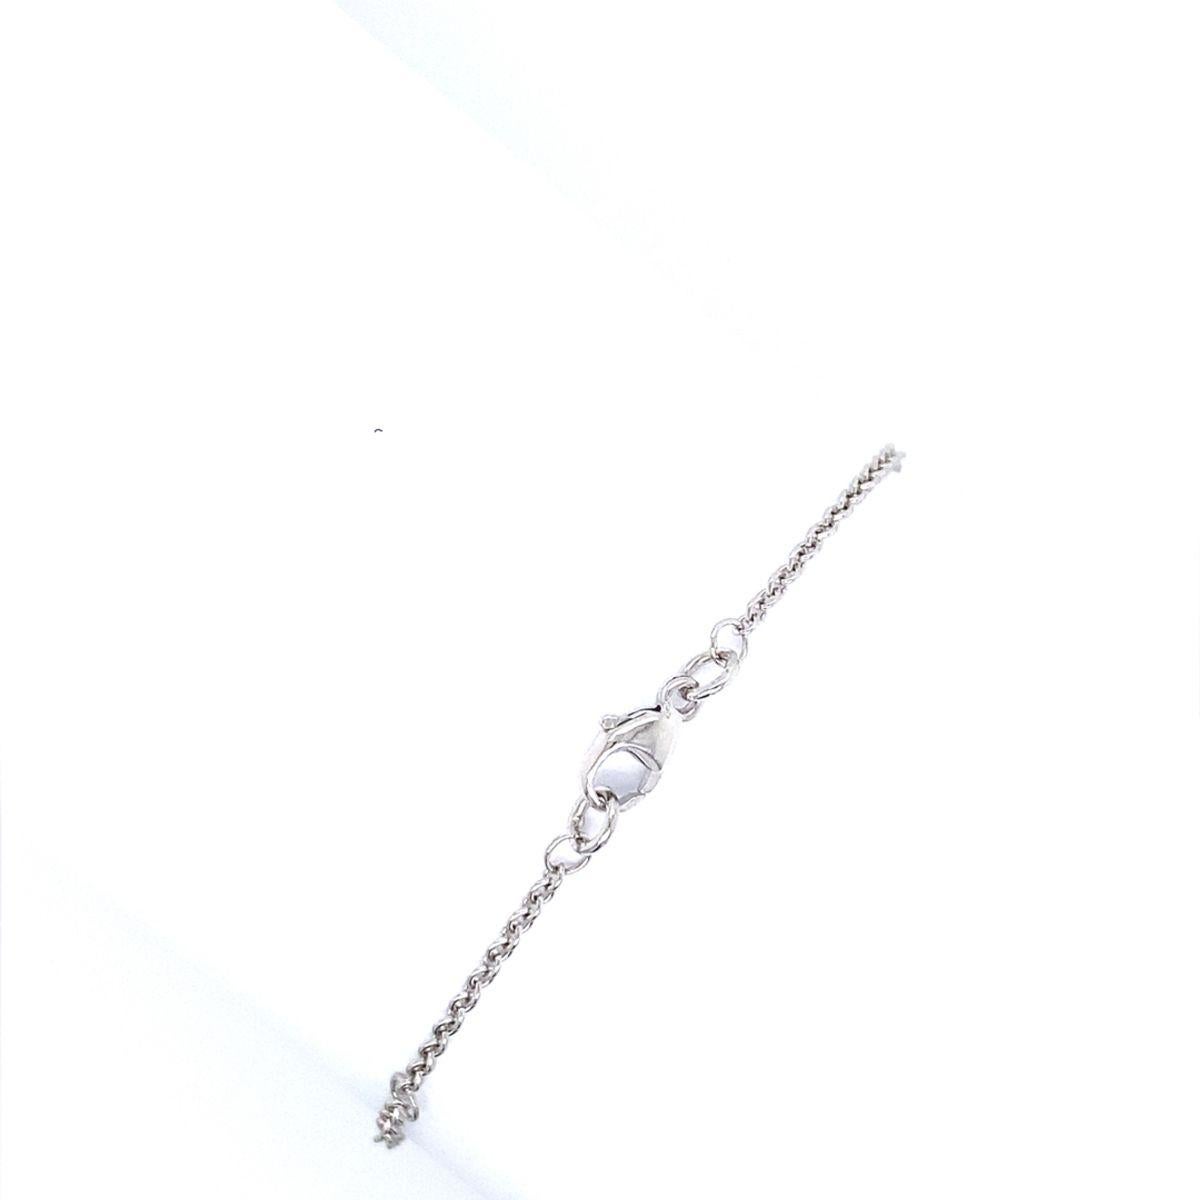 18ct White Gold Tennis/Chain Bracelet, Set With 3 Round Brilliant Cut Diamonds

Additional Information:
Total Diamond Weight: 0.45ct
Diamond Colour: G/H
Diamond Clarity: SI1
Total Weight: 2.9g
Head Size: L 14mm x W 4.45mm
SMS4936